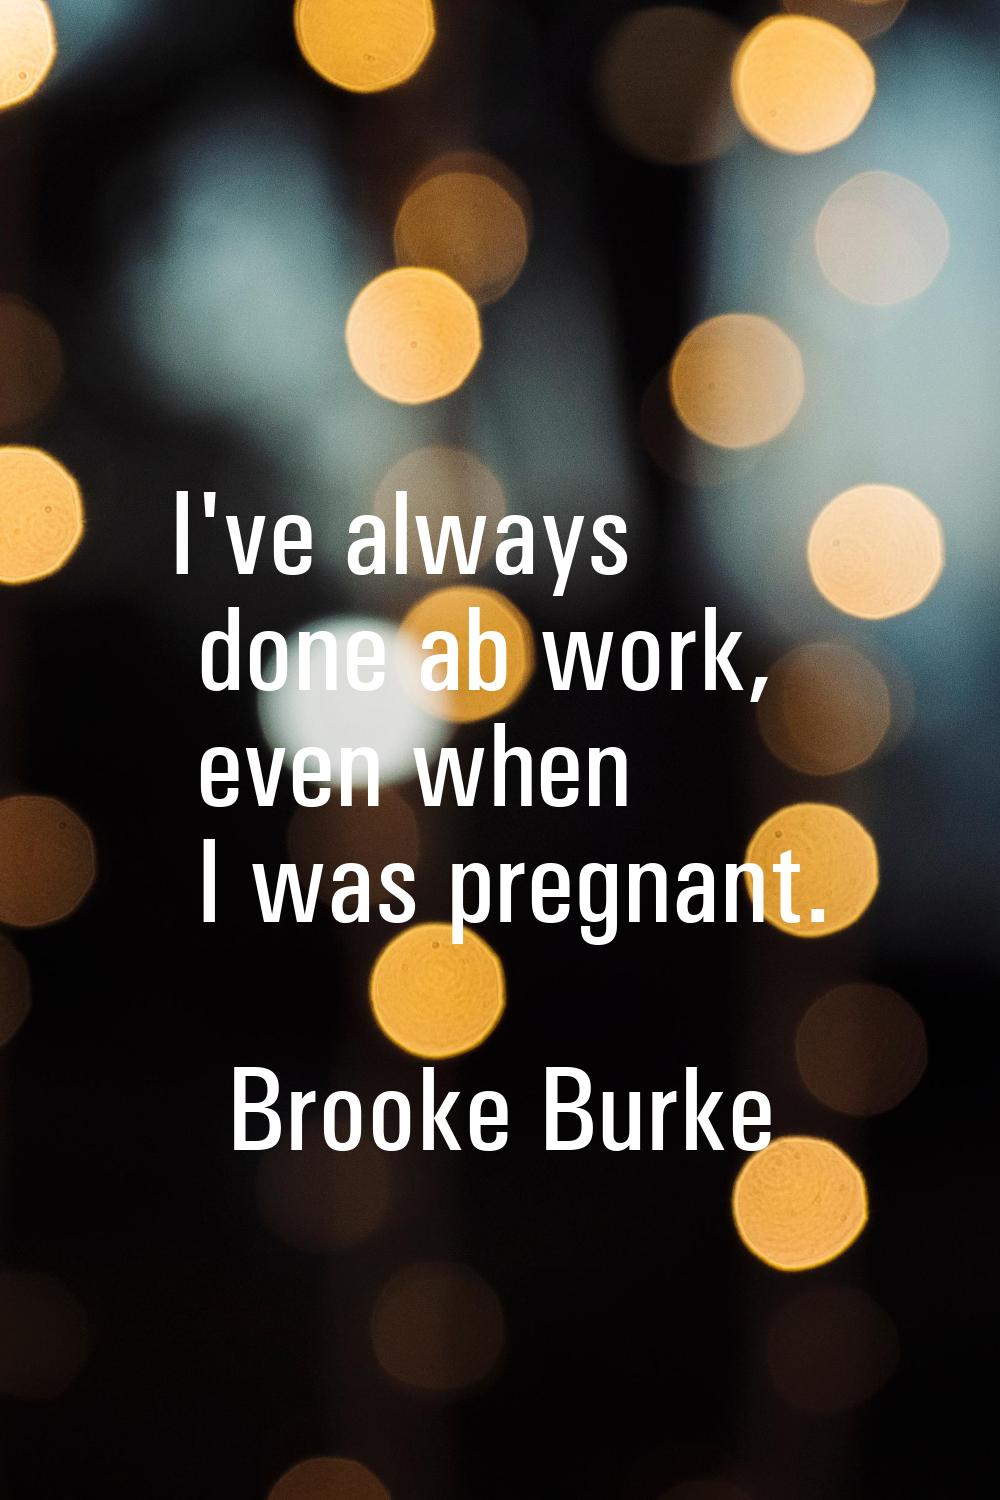 I've always done ab work, even when I was pregnant.